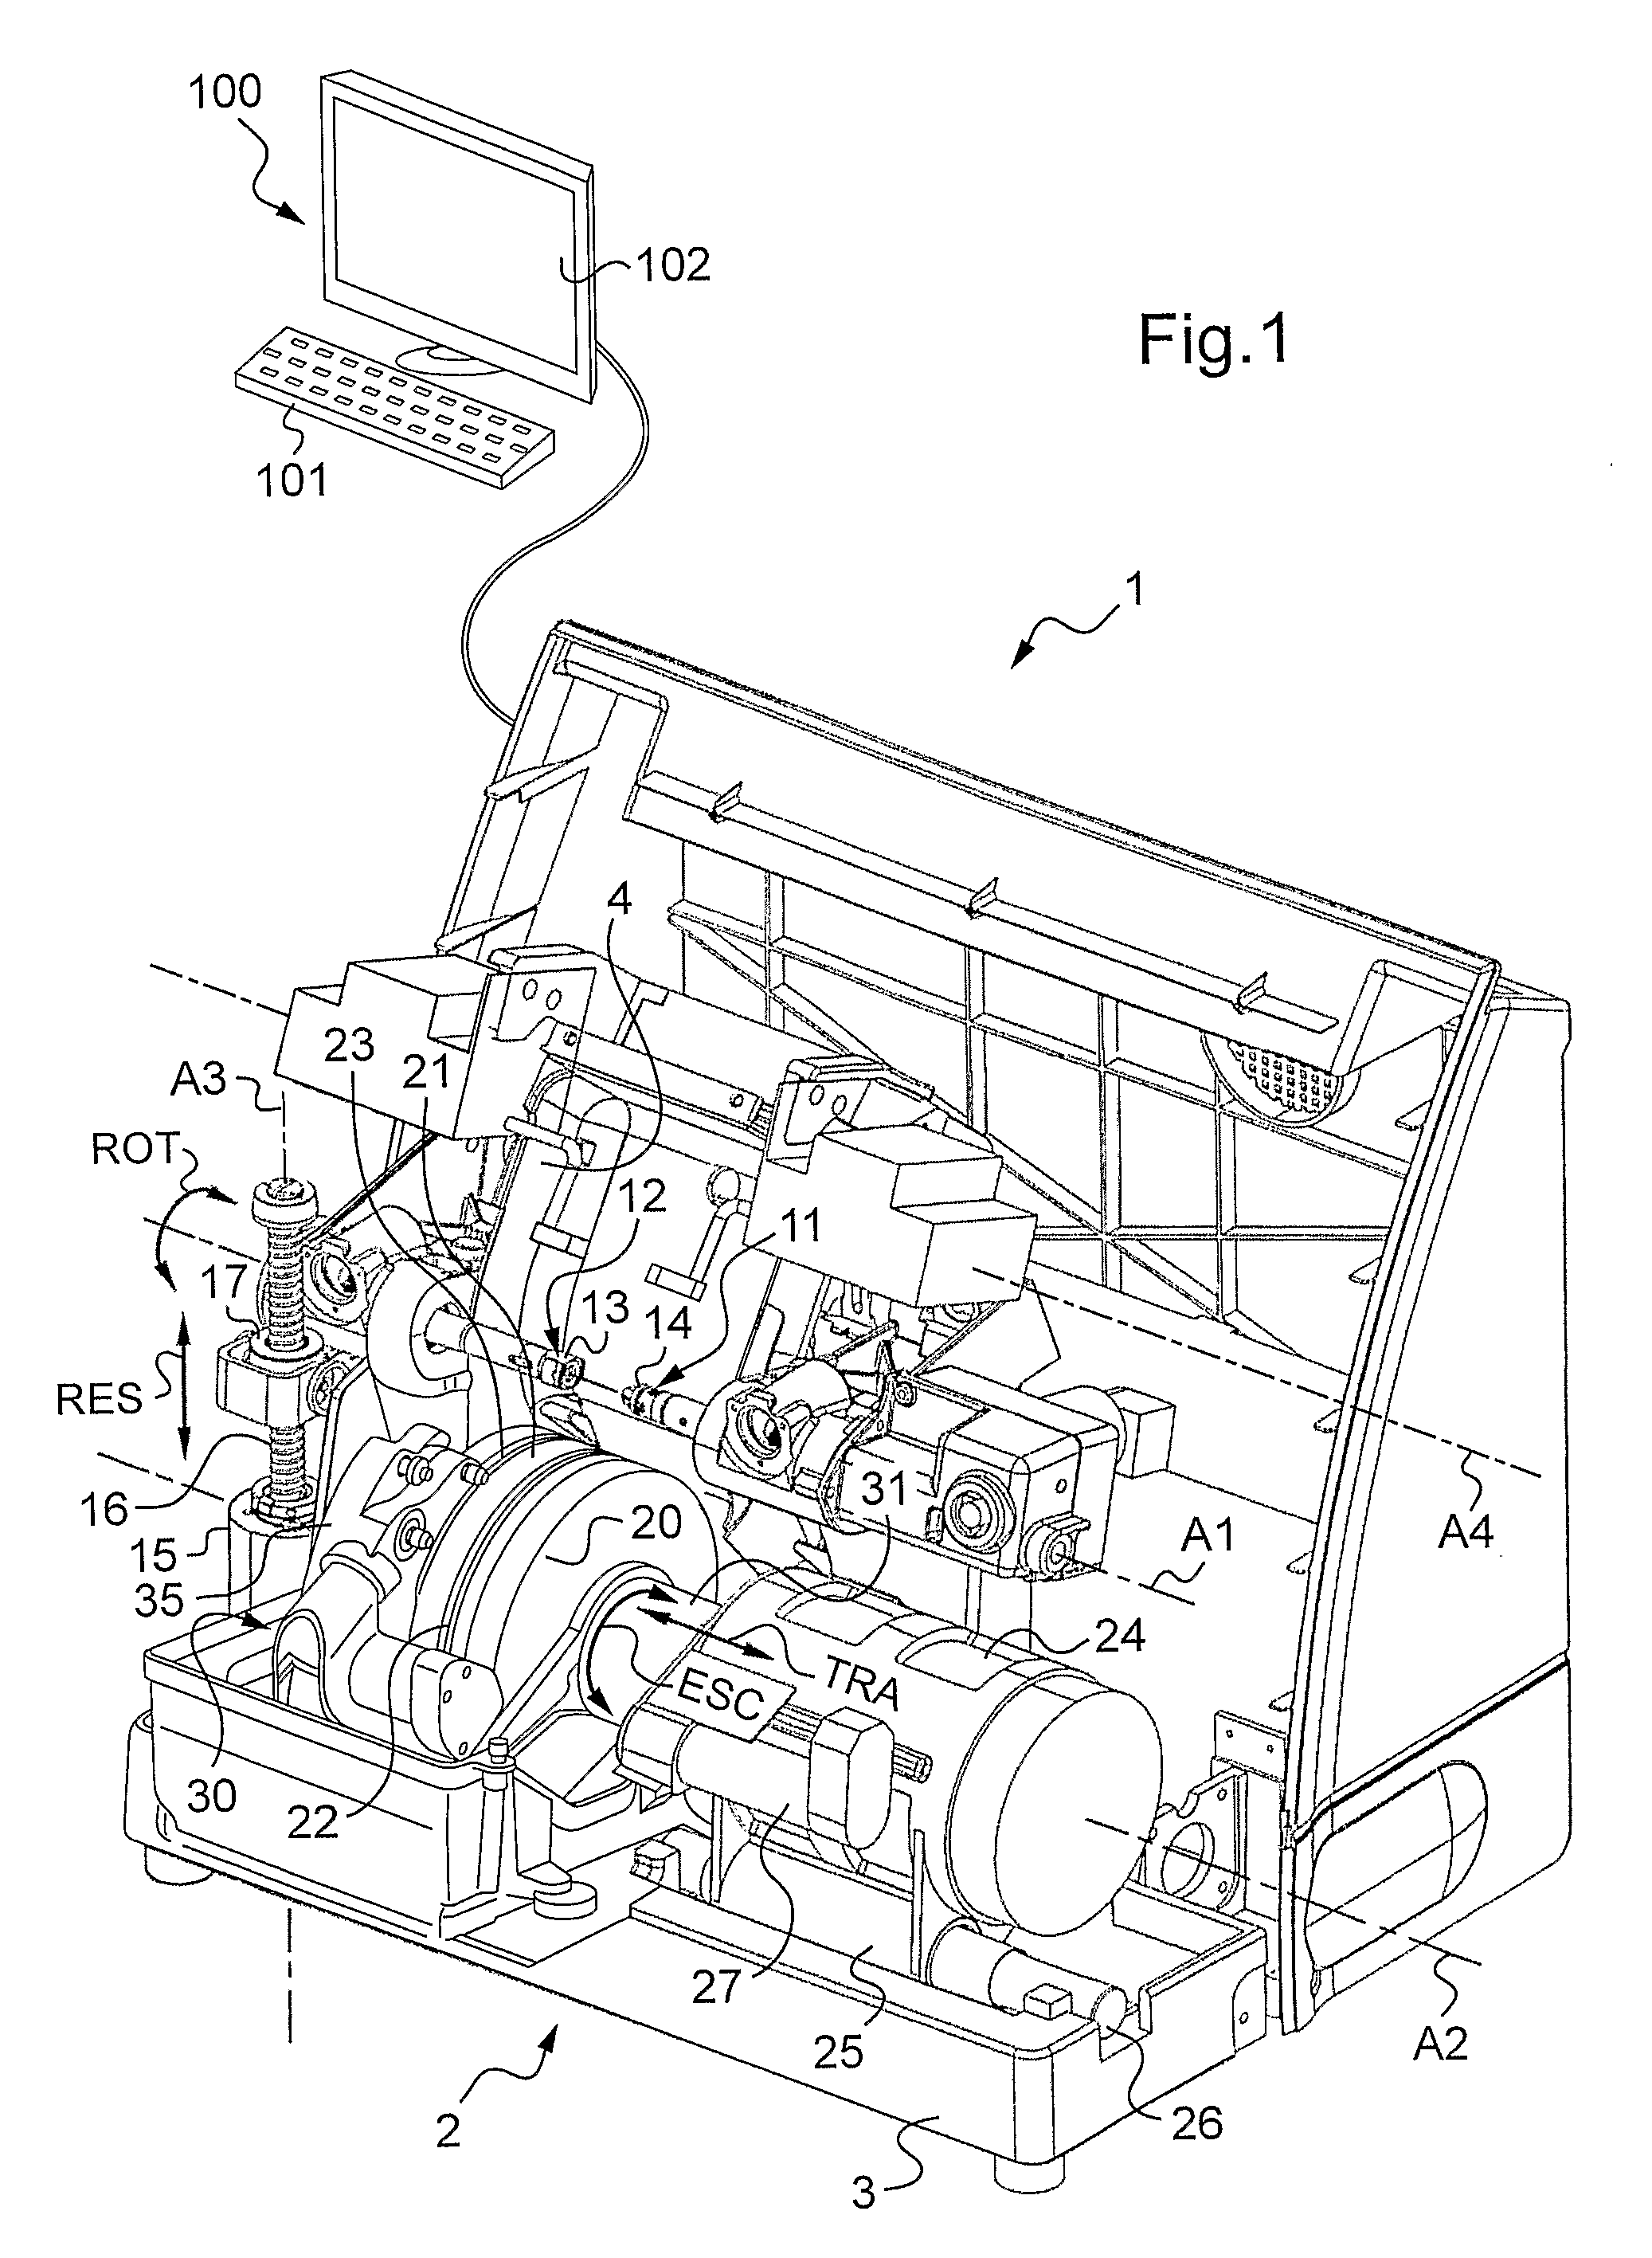 Device for machining ophthalmic lenses, the device having a plurality of machining tools placed on a swivel module